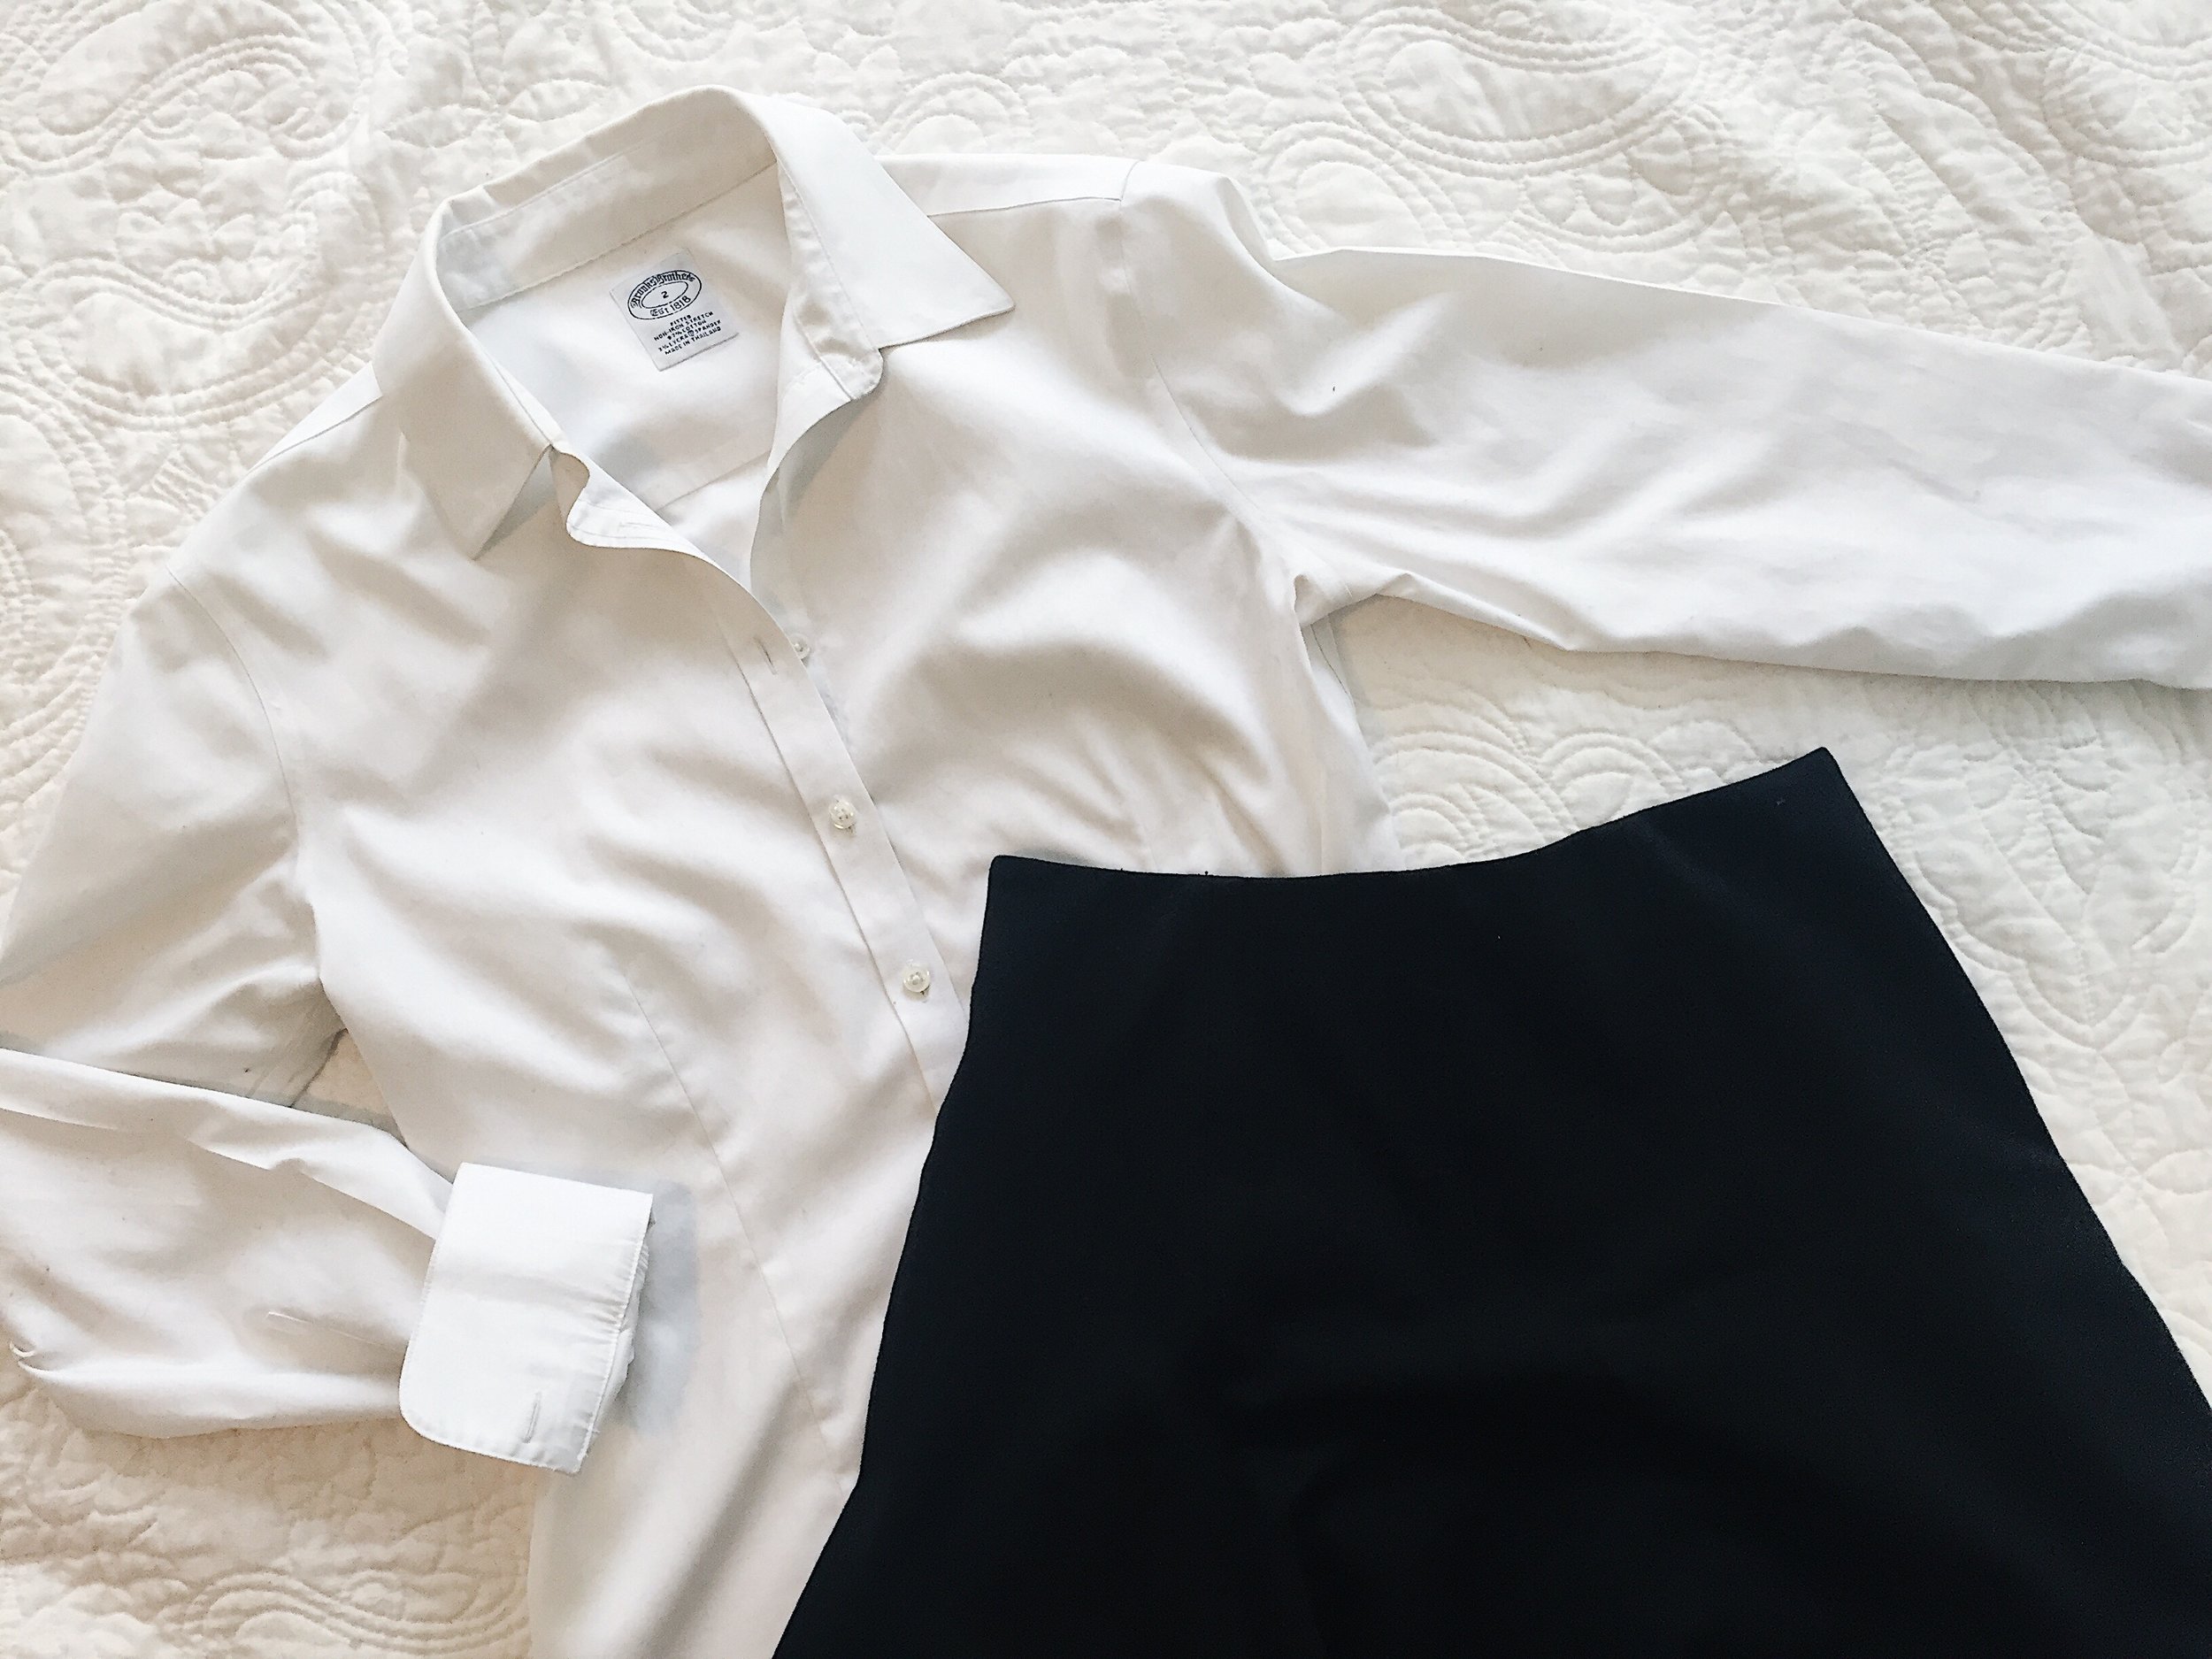 hand harvest squat UNIFORM DRESSING | White Shirt + Black Skirt - ABOUT UNIFORM DRESSING | White  Shirt + Black Skirt — SHOP UNIFORM DRESSING | White Shirt + Black Skirt 5  Must-Read Tips For First Time Home Buyers